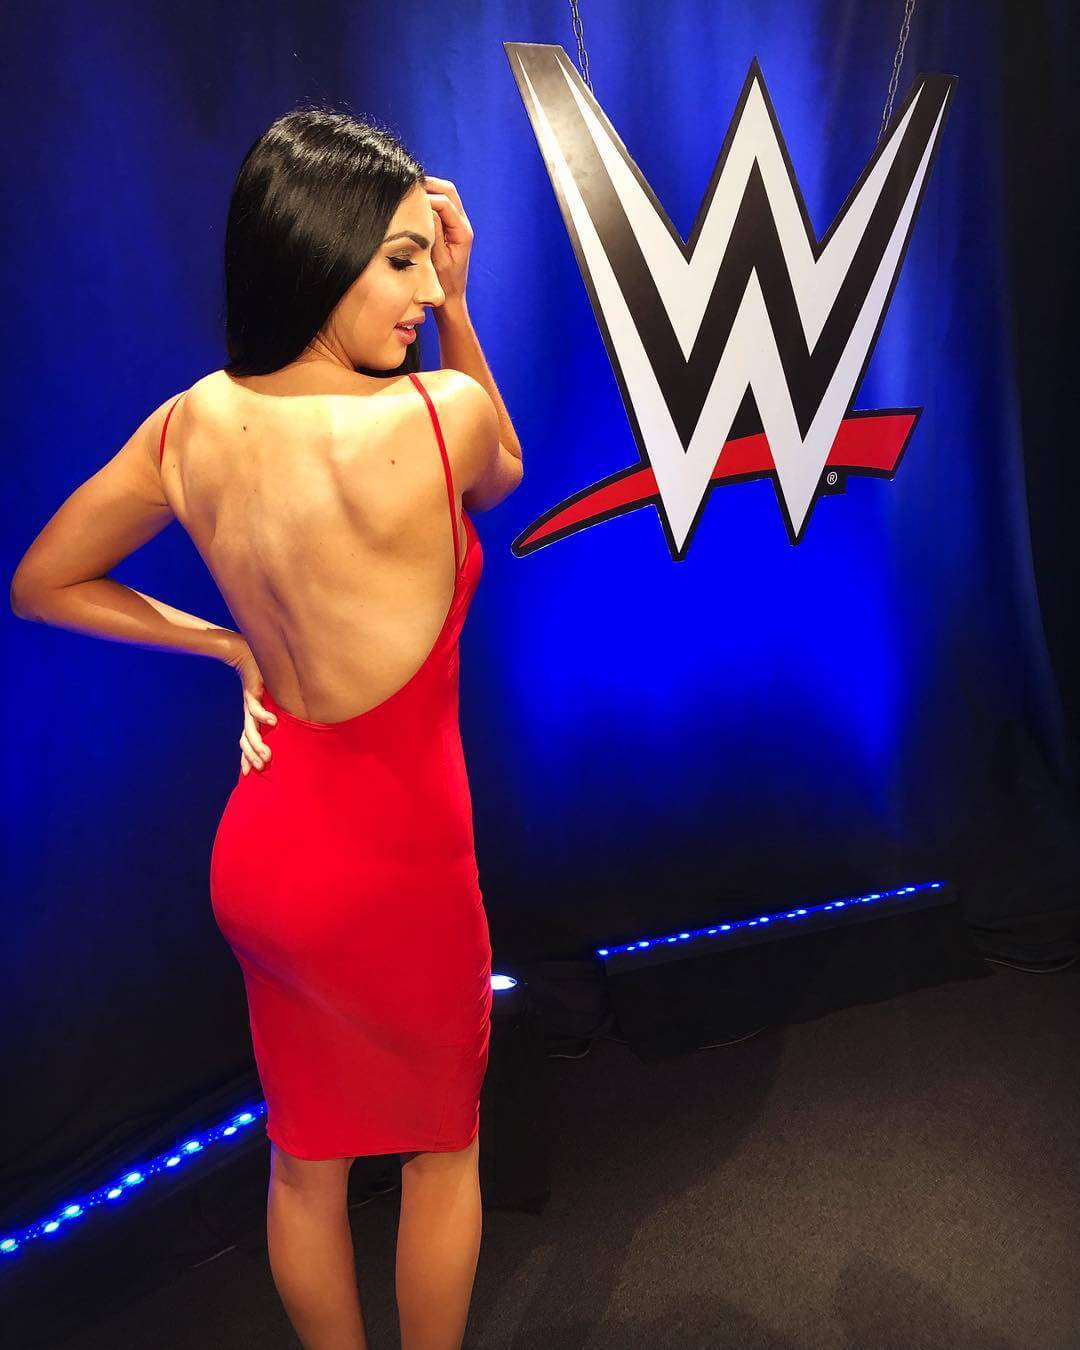 The Beautiful Billie Kay in a Hot Pose. WWE Diva Billie Kay's Hourglass Figure Is a Thing of Beauty. Events Photo Gallery. India.com Photogallery